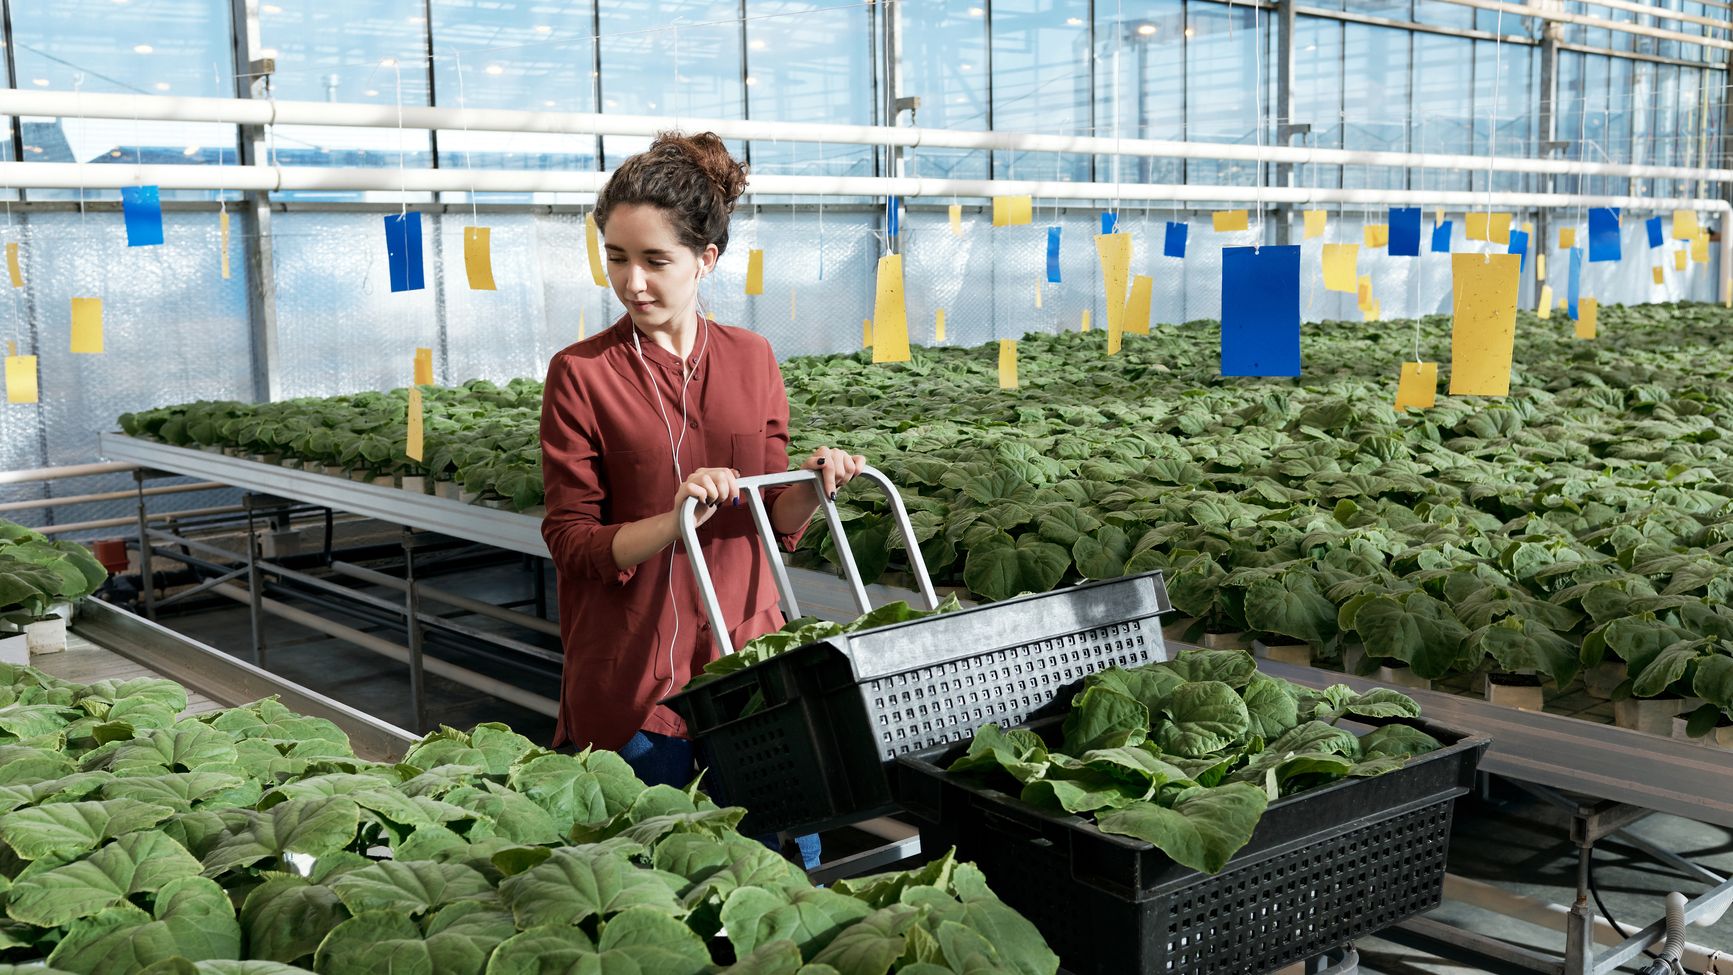 Photograph of a worker picking fresh produce in a greenhouse